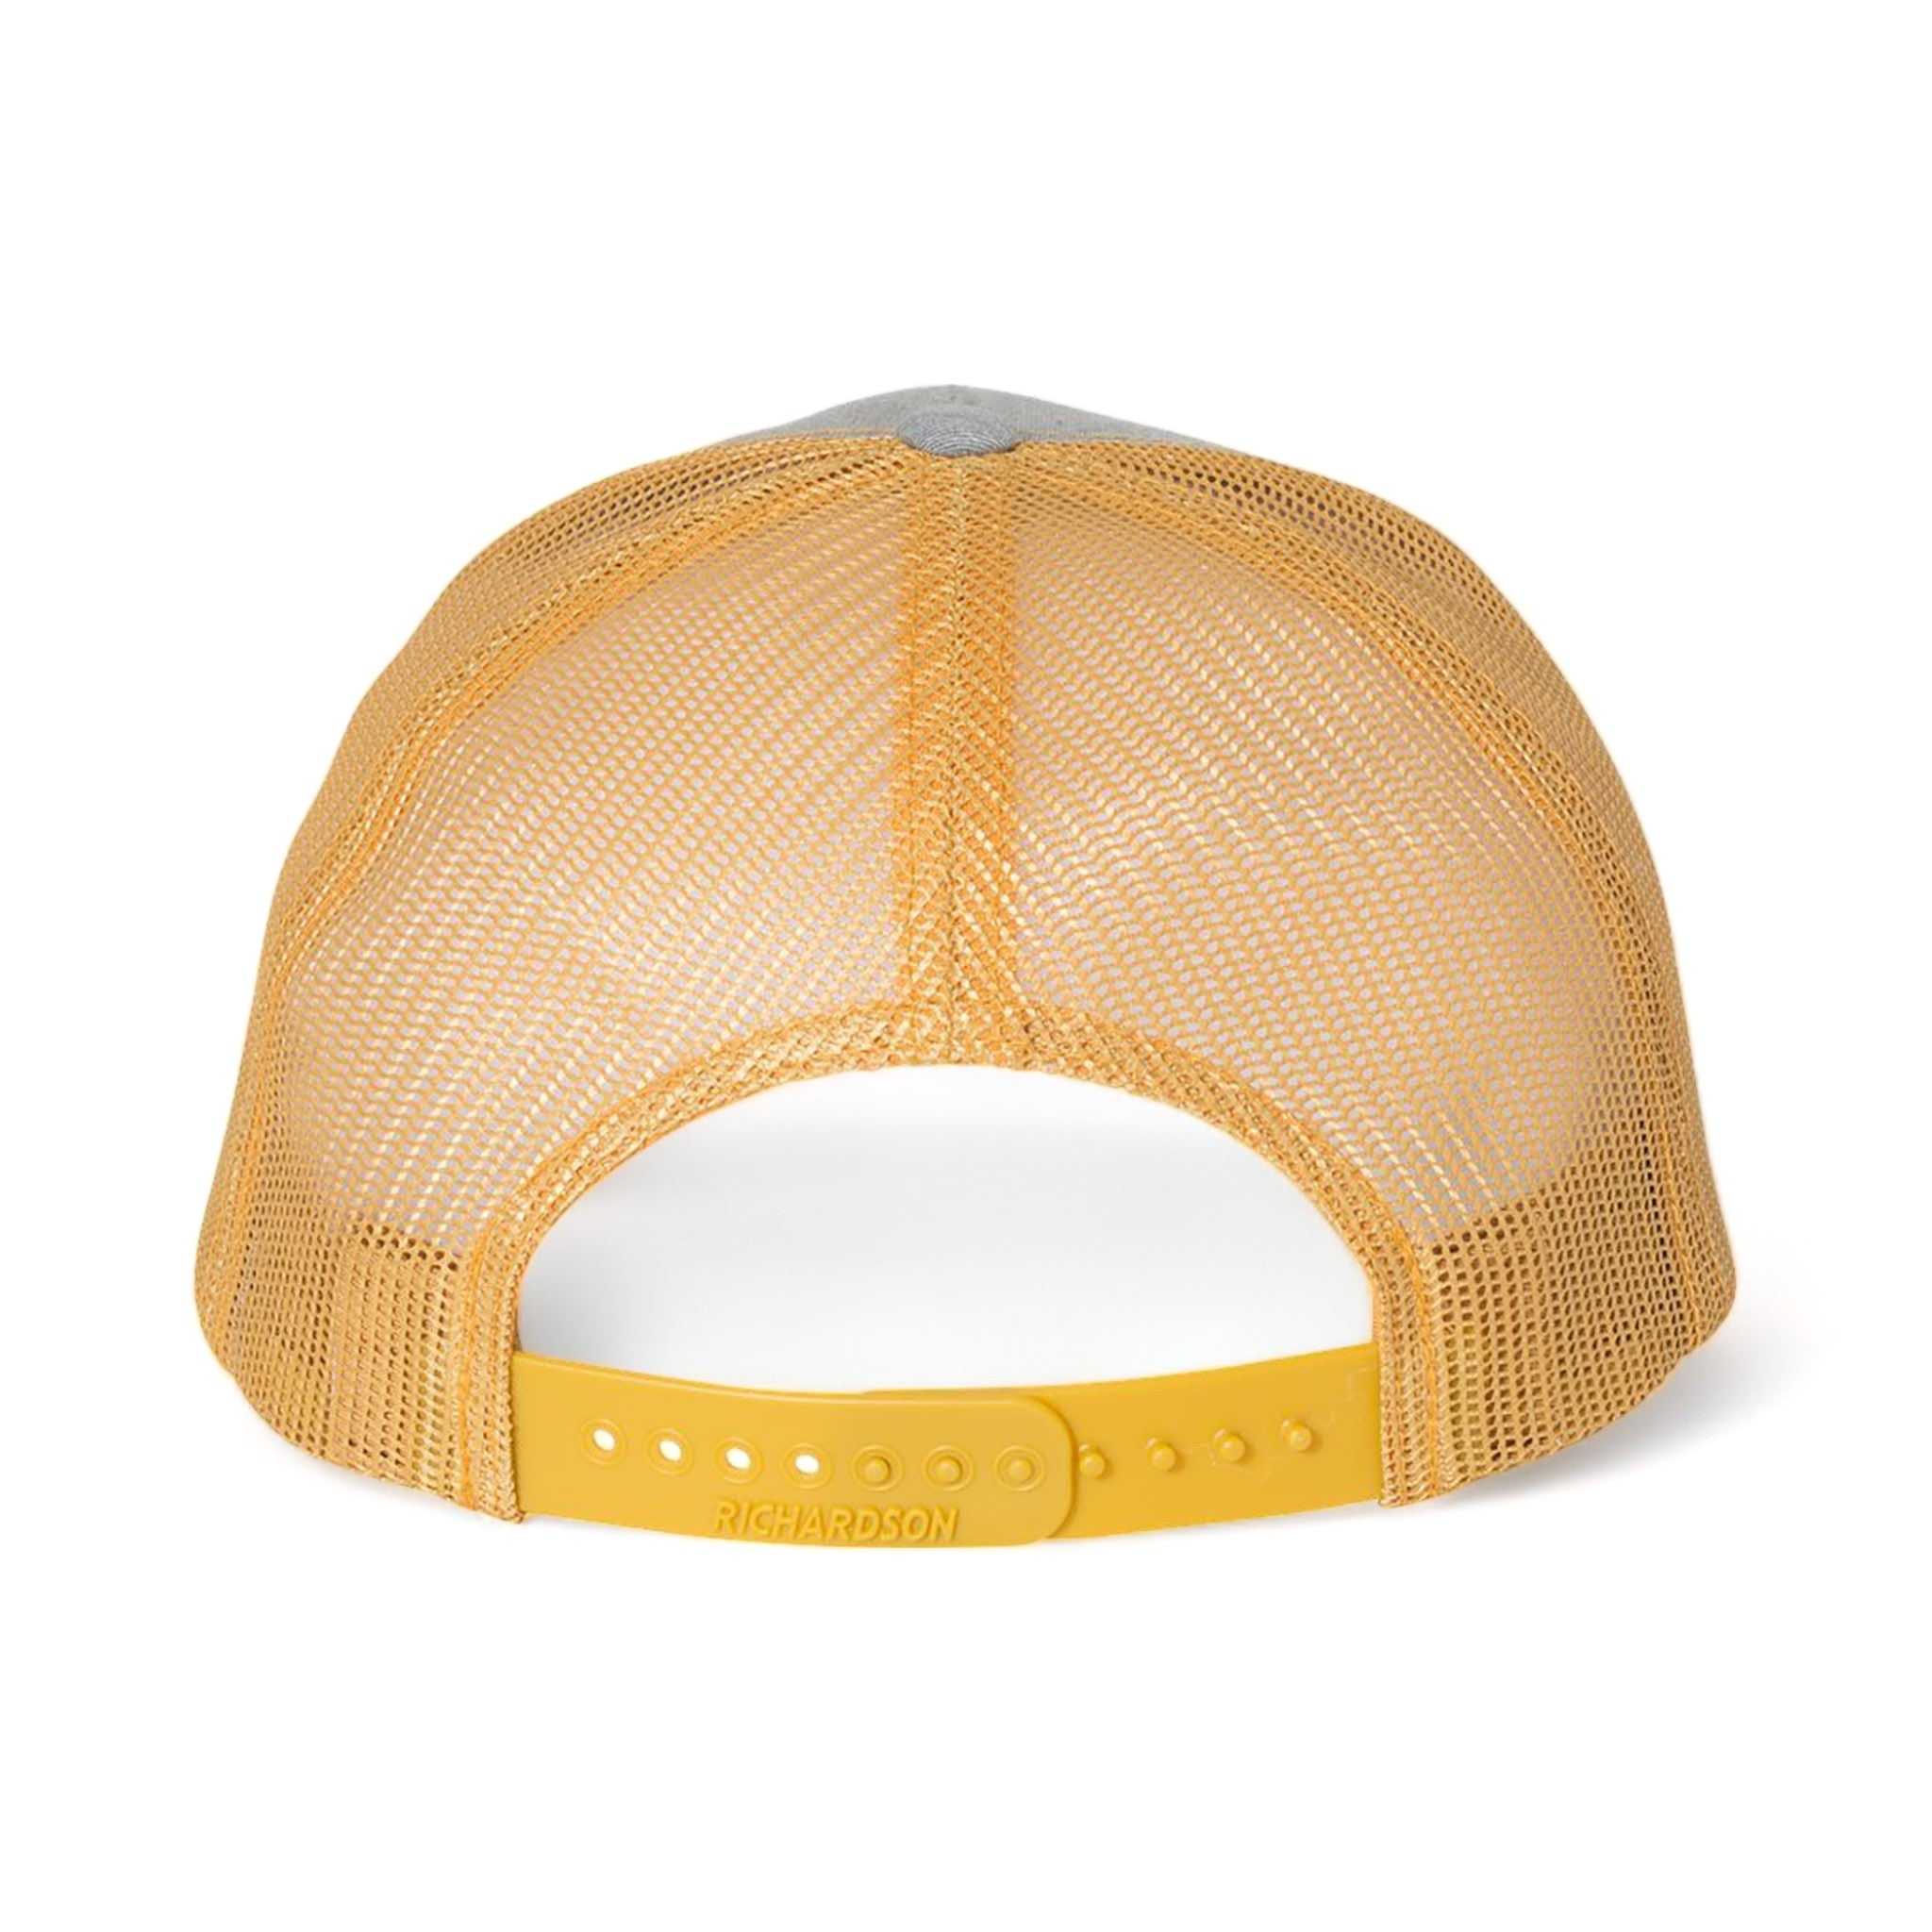 Back view of Richardson 112FP custom hat in heather grey and amber gold